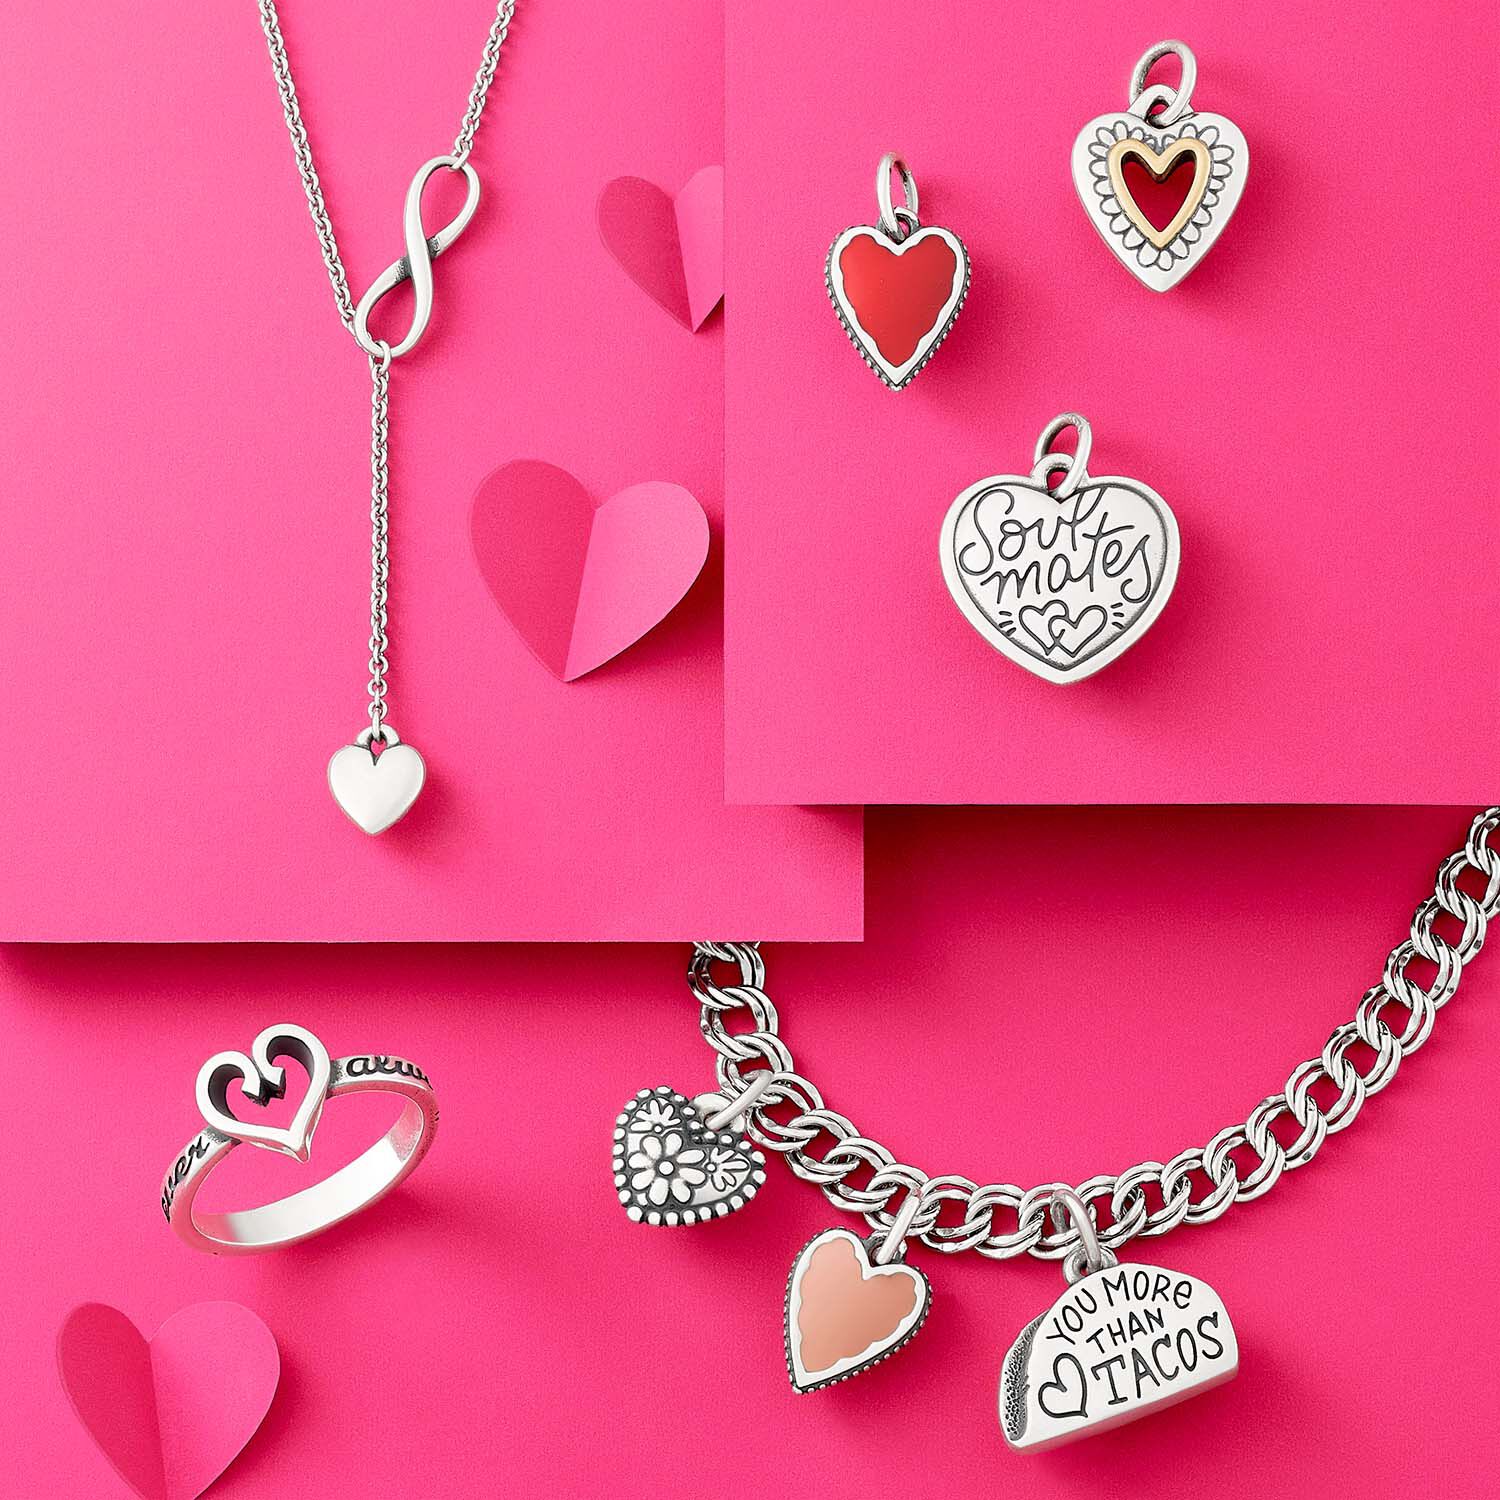 Sterling silver heart rings, charms and necklaces/chains. 